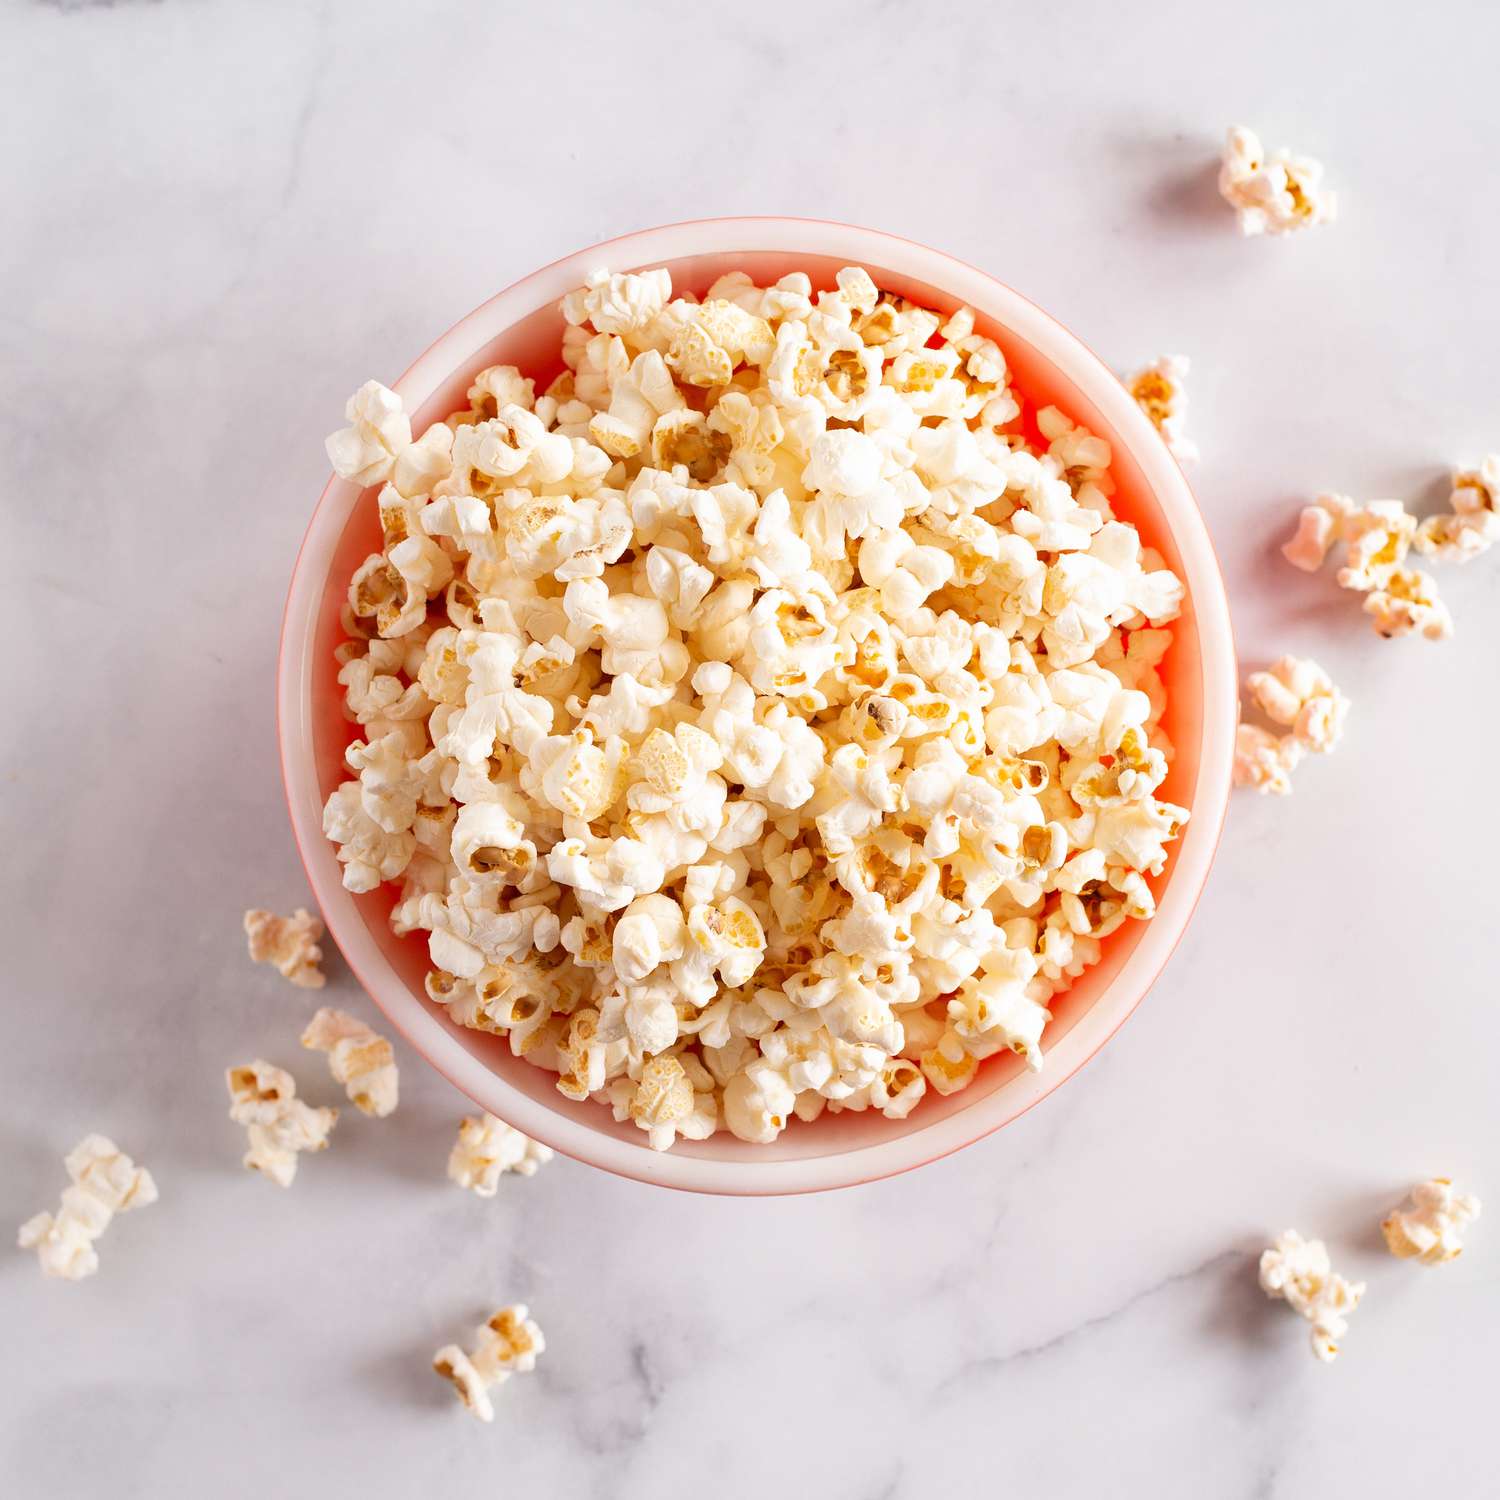 Popcorn in a red bowl